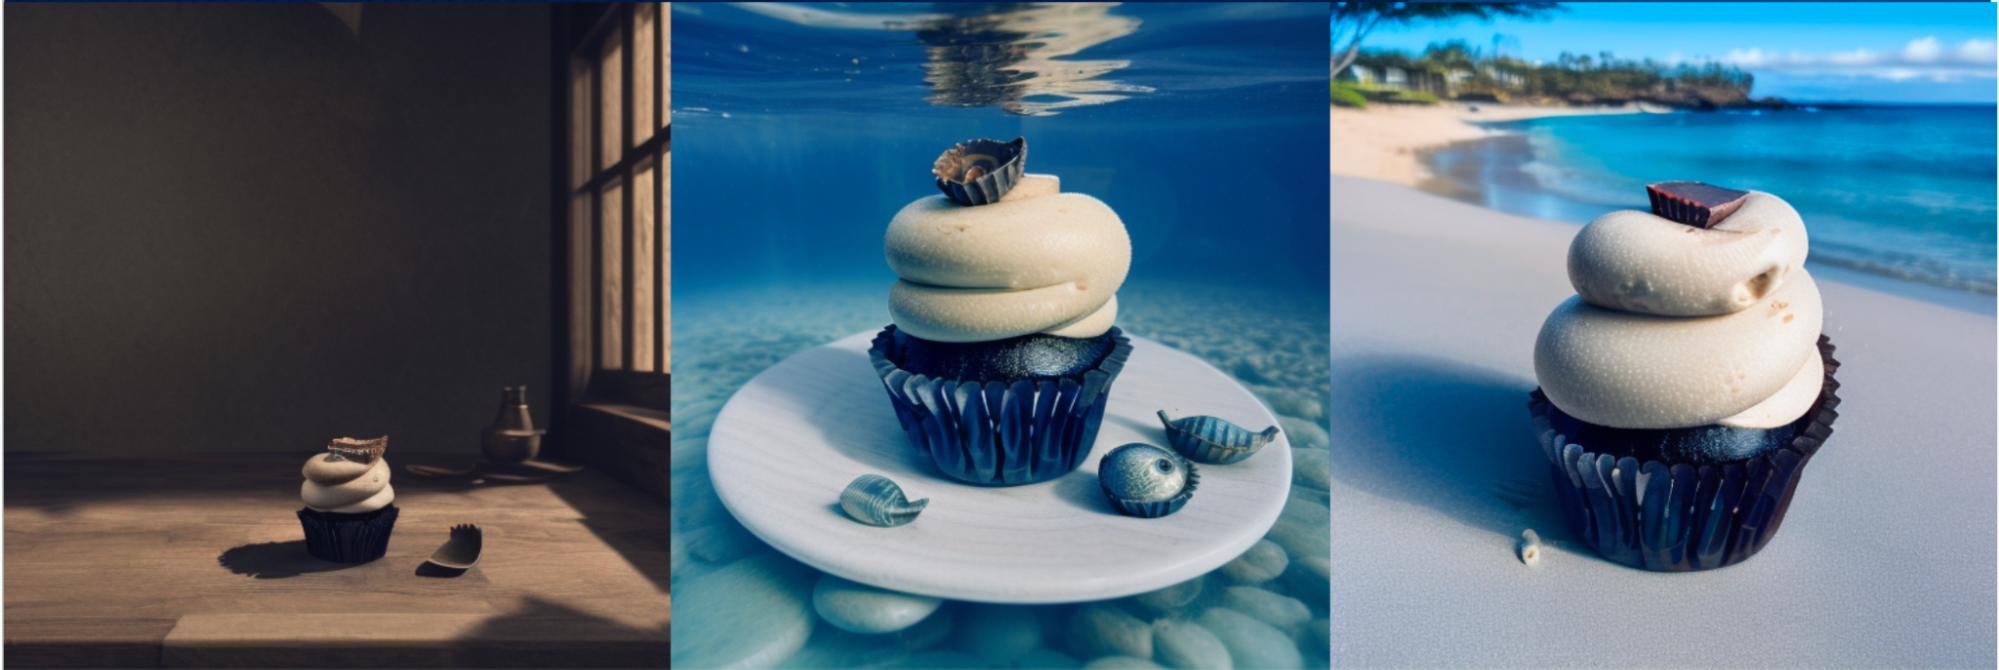 OctoAI-fine-tuning-a-cupcake-in-different-backgrounds || '